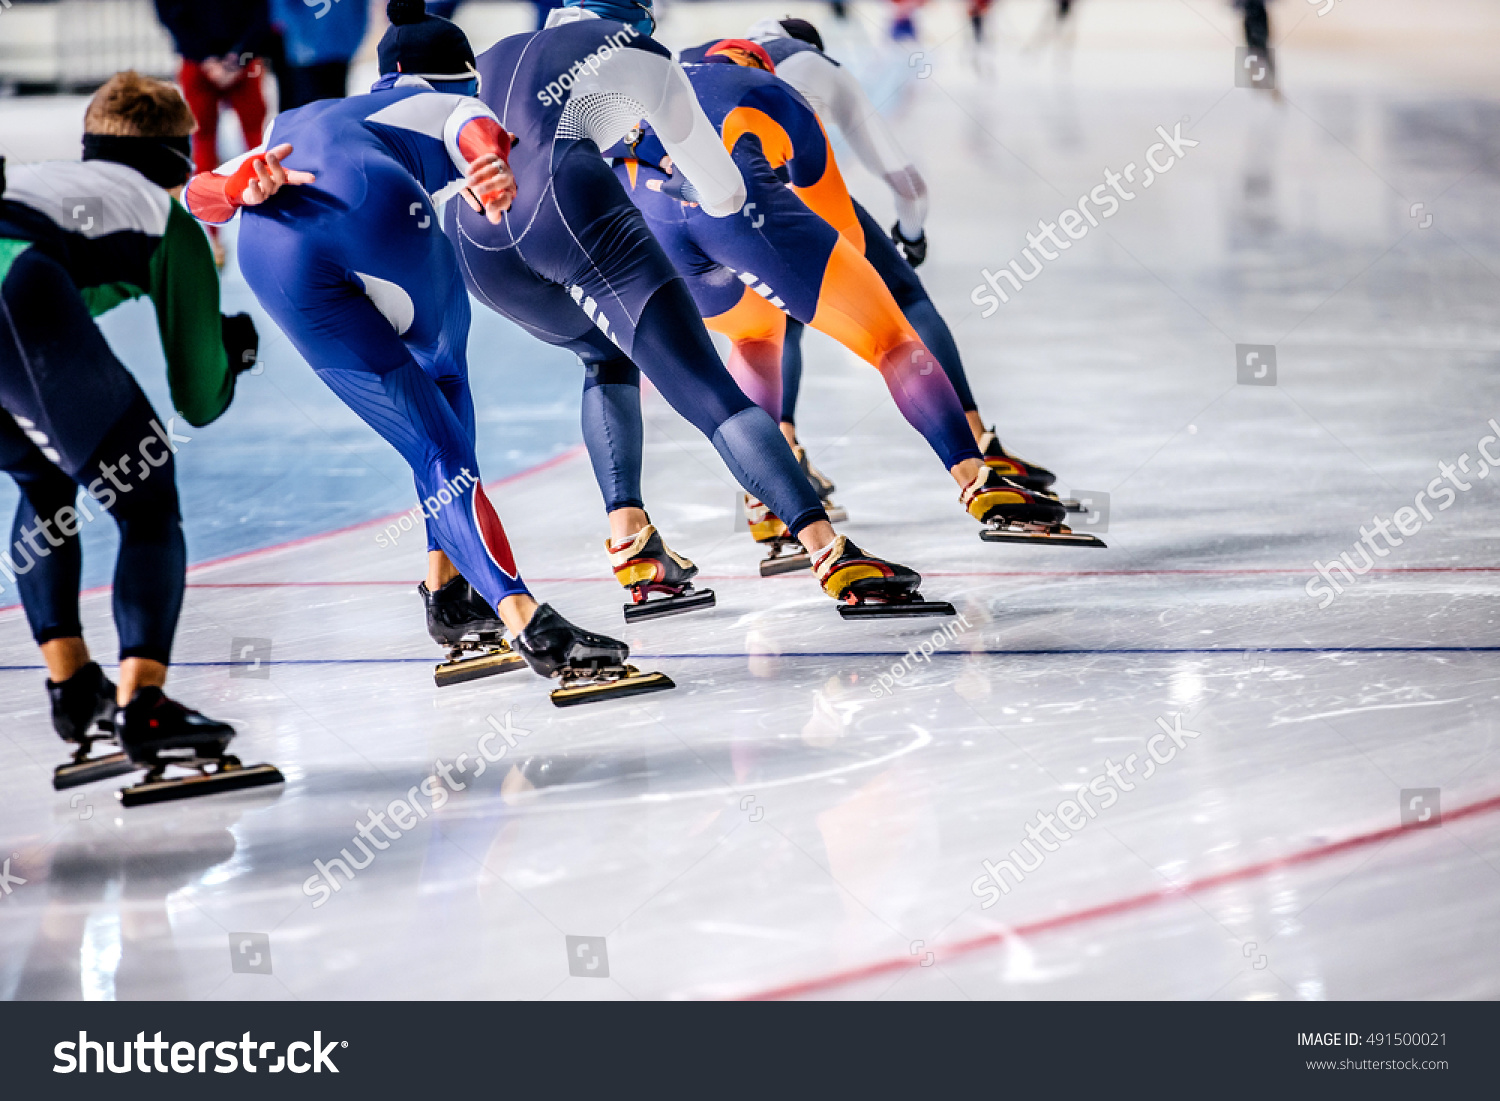 group of men skating on ice sports arena. warm-up before competitions in speed skating #491500021